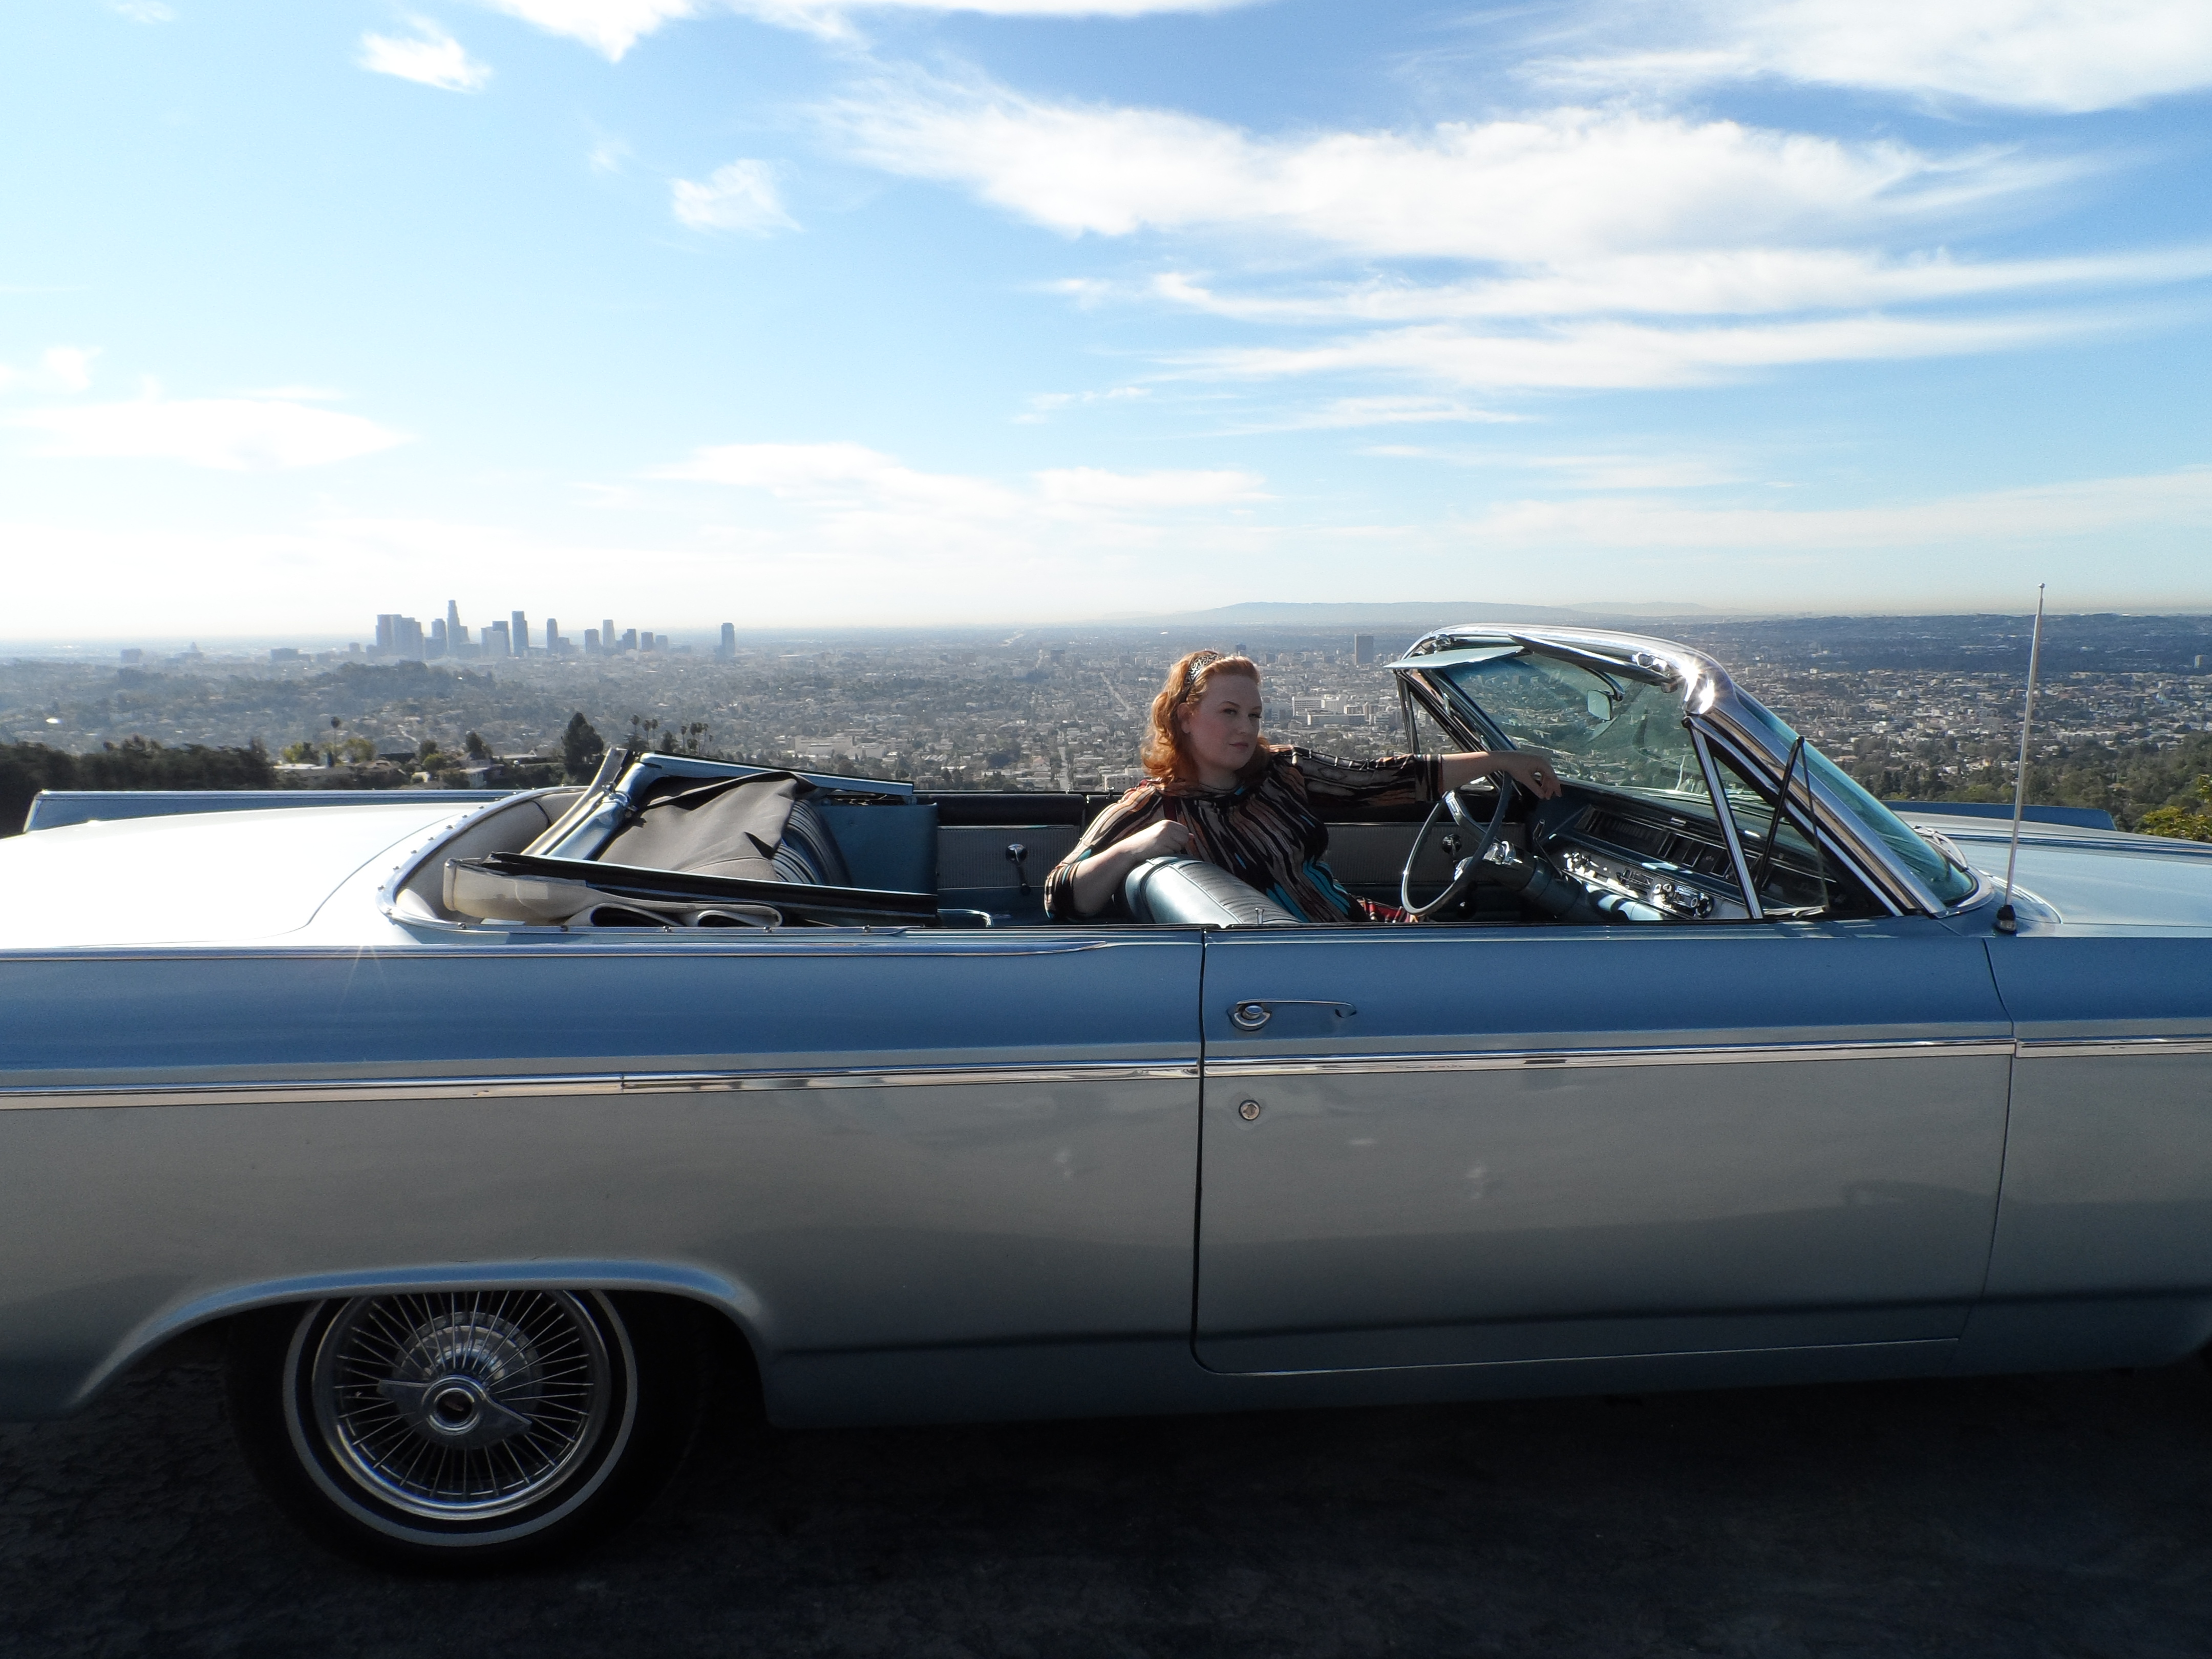 Angie overlooking Los Angeles. (2013)